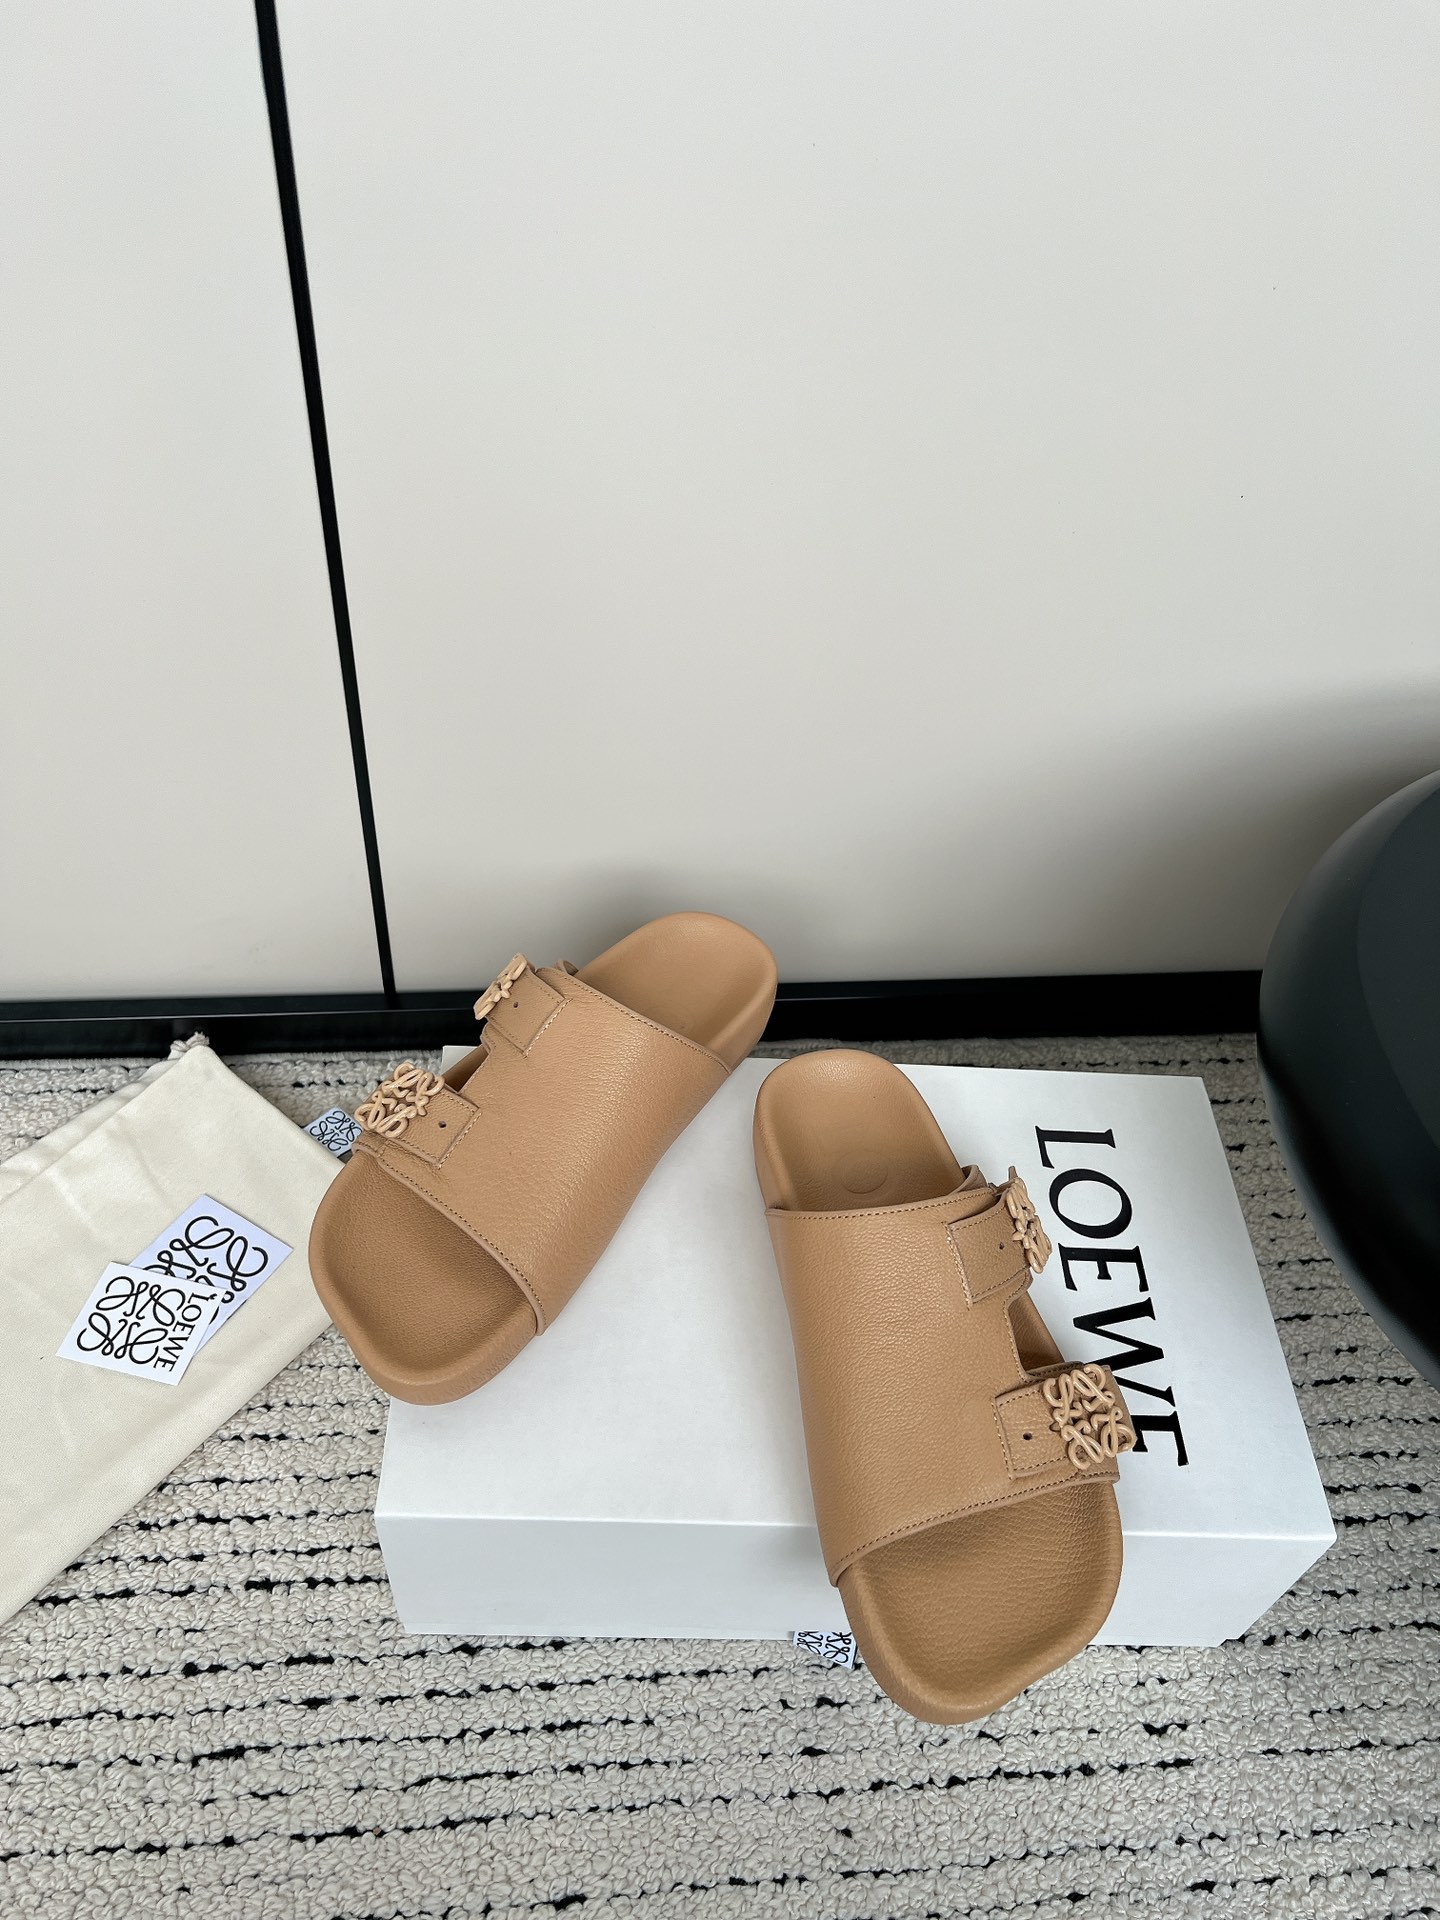 Loewe Shoes Sandals Slippers 7 Star Collection
 Cowhide PU Sheepskin Spring/Summer Collection Beach